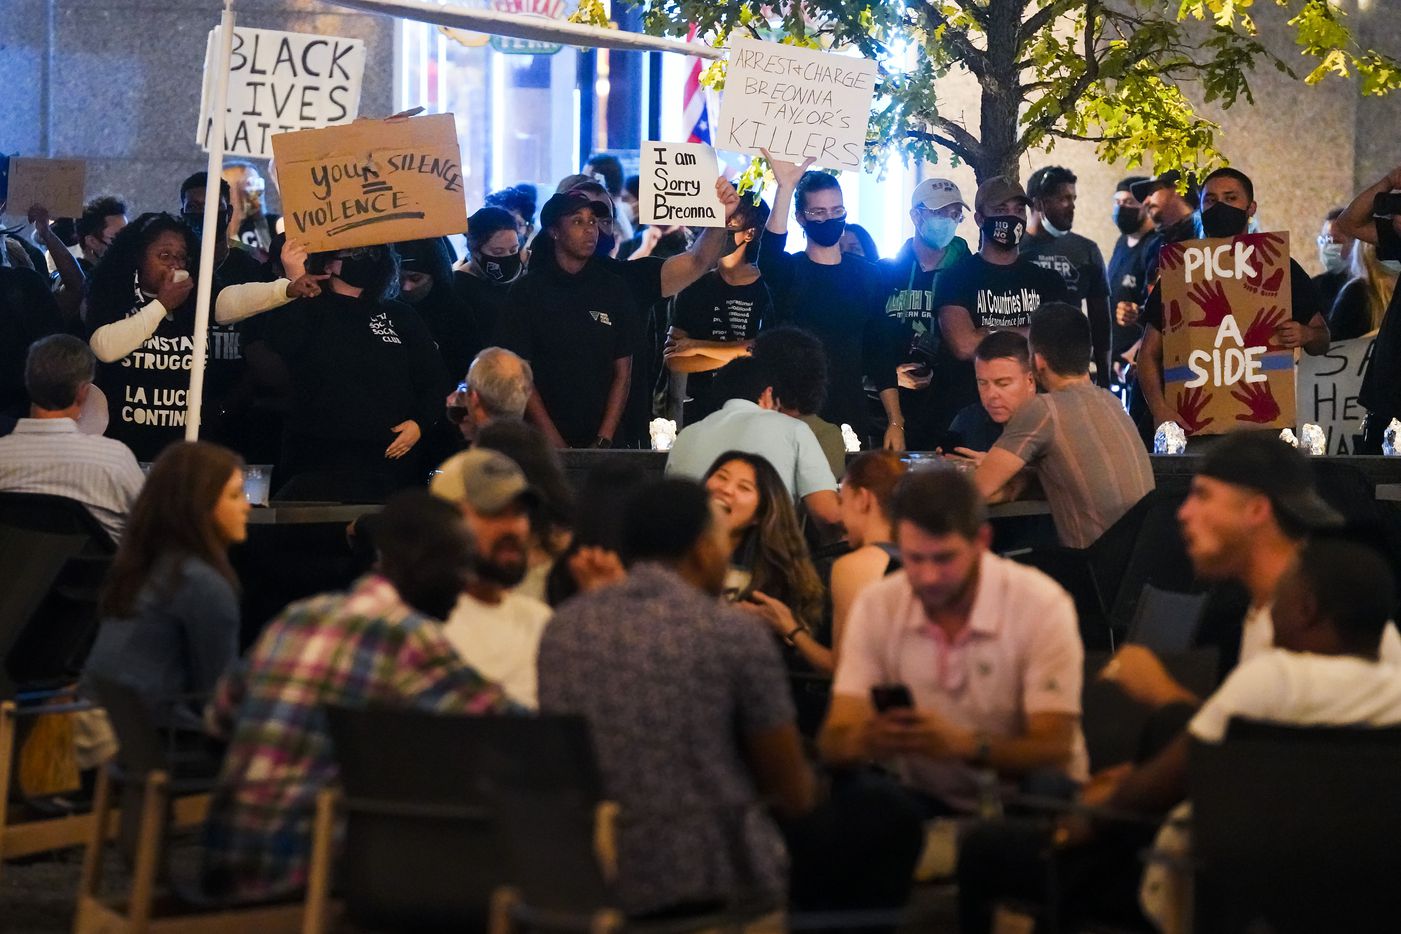 Protesters shout at people dining on the patio at Jaxon Beer Garden in AT&T Discovery District in downtown Dallas after a Kentucky grand jury brought no charges against Louisville police for the killing of Breonna Taylor on Wednesday, Sept. 23, 2020.